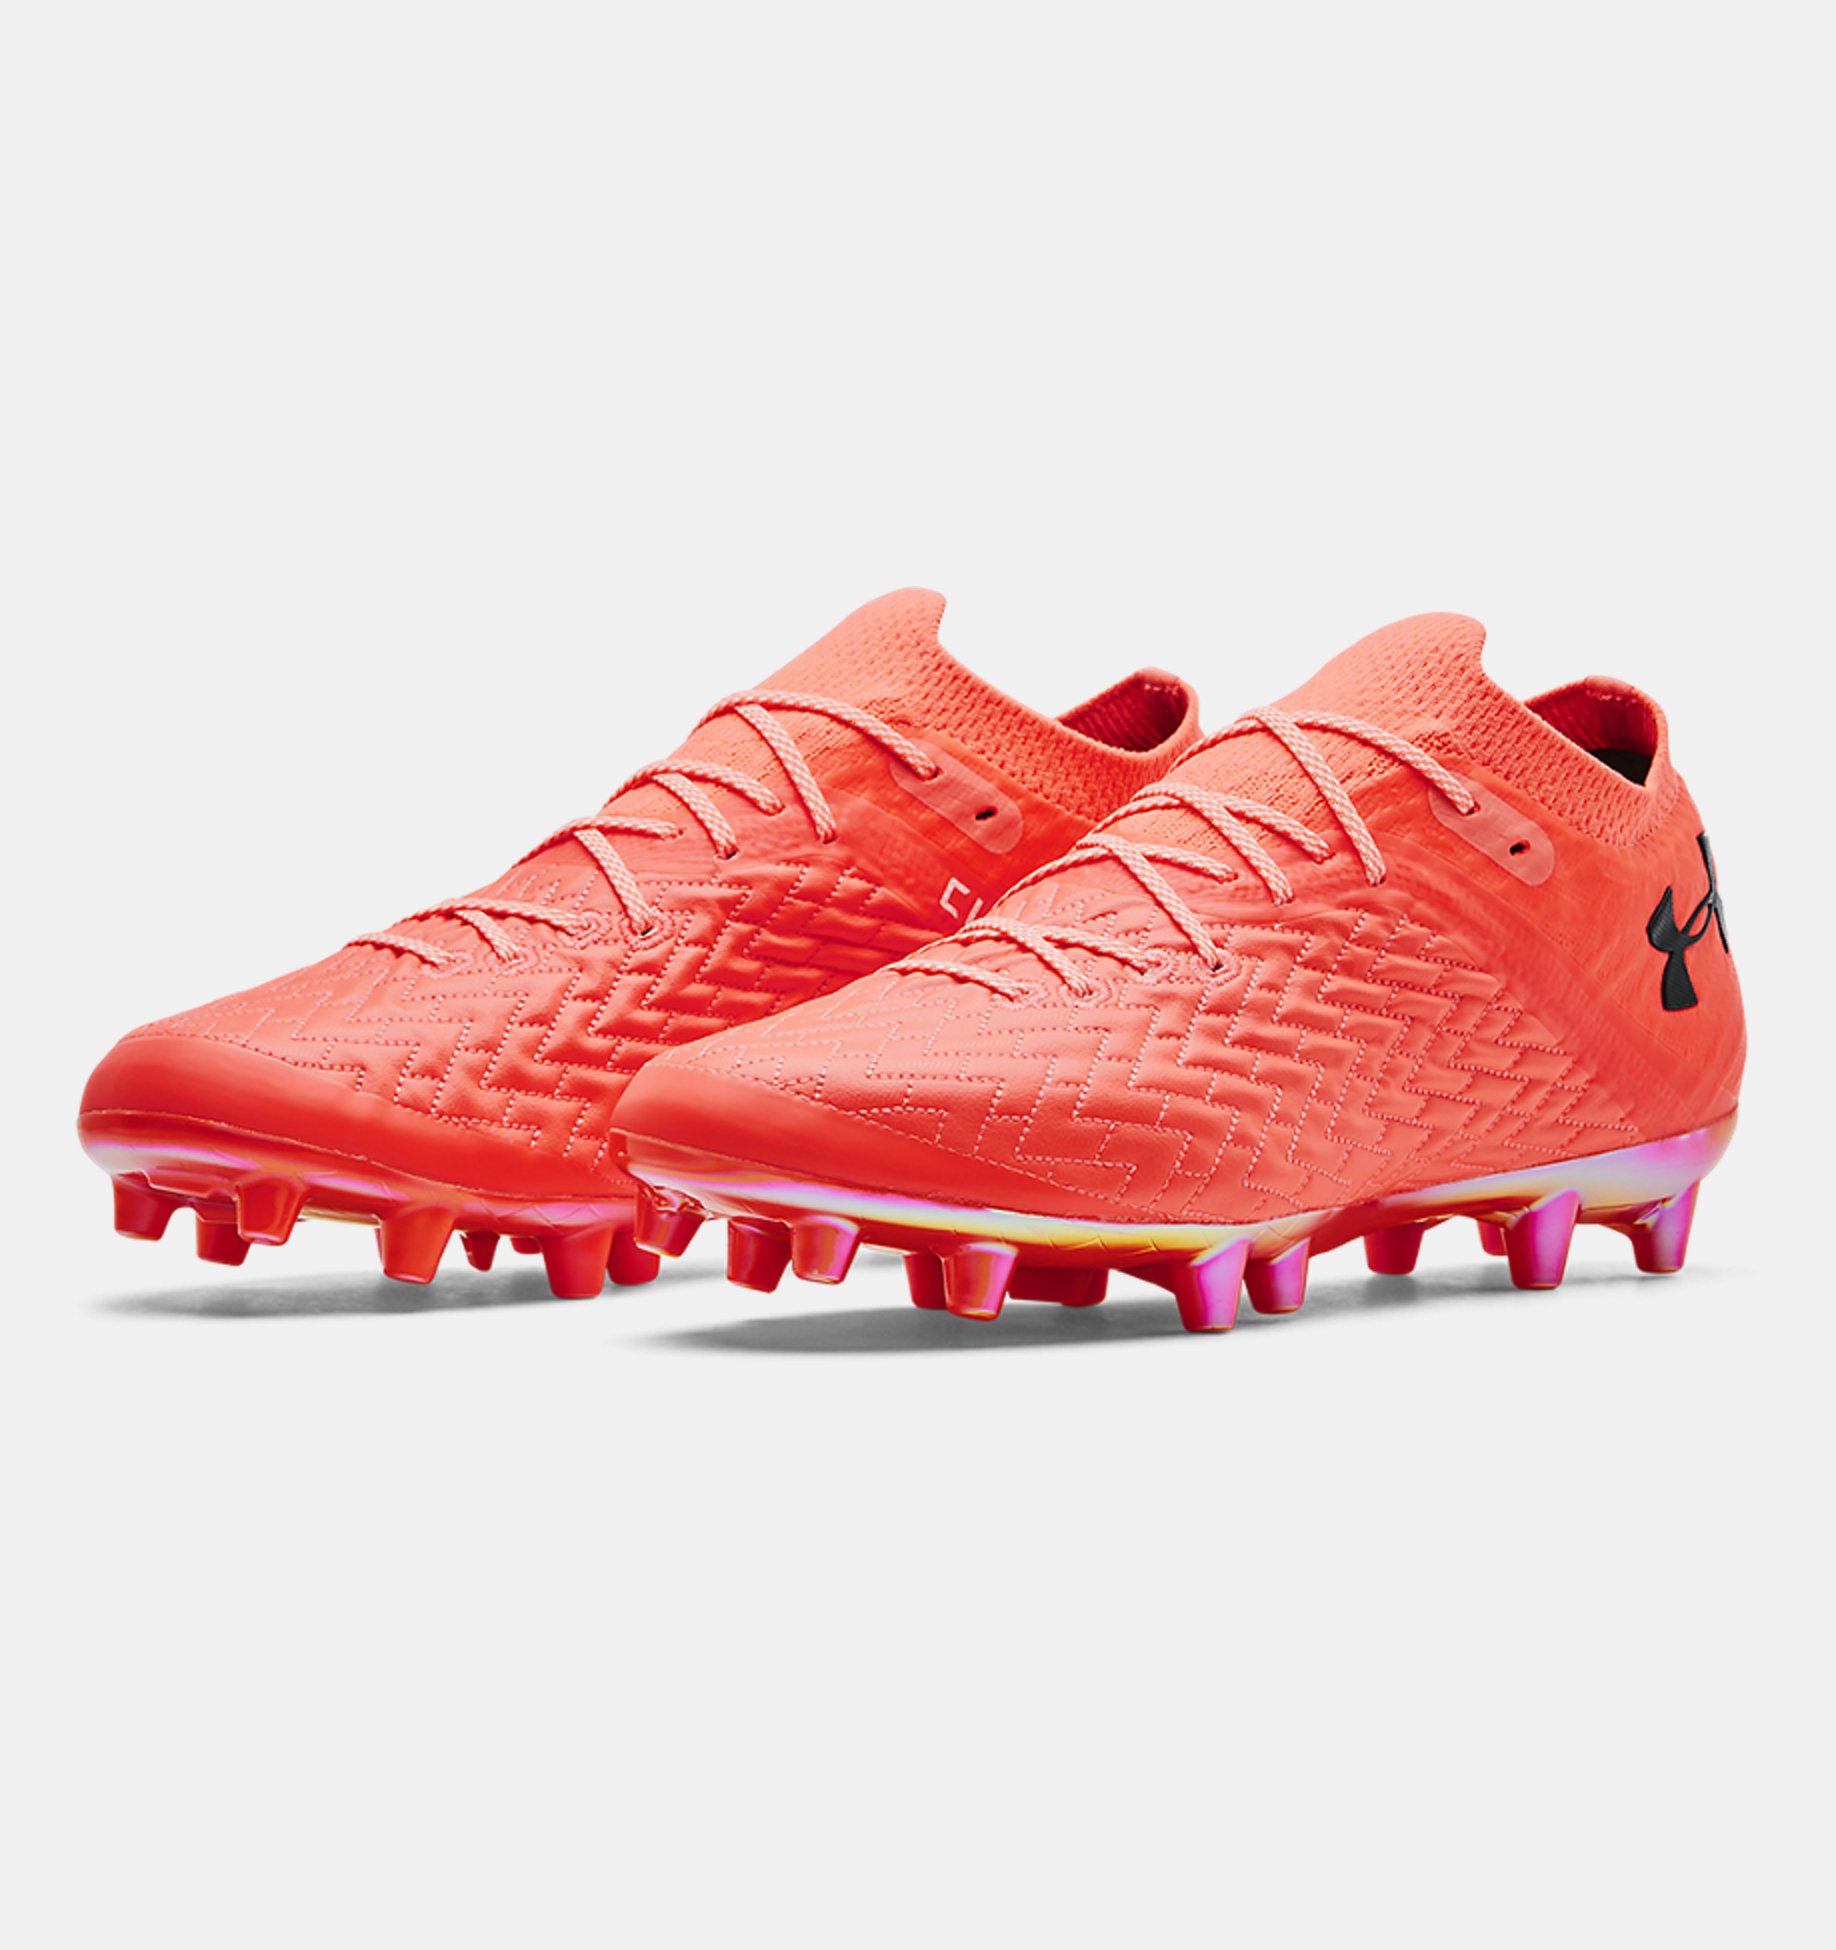 Unisex High Top Football Shoes Soccer Boots 